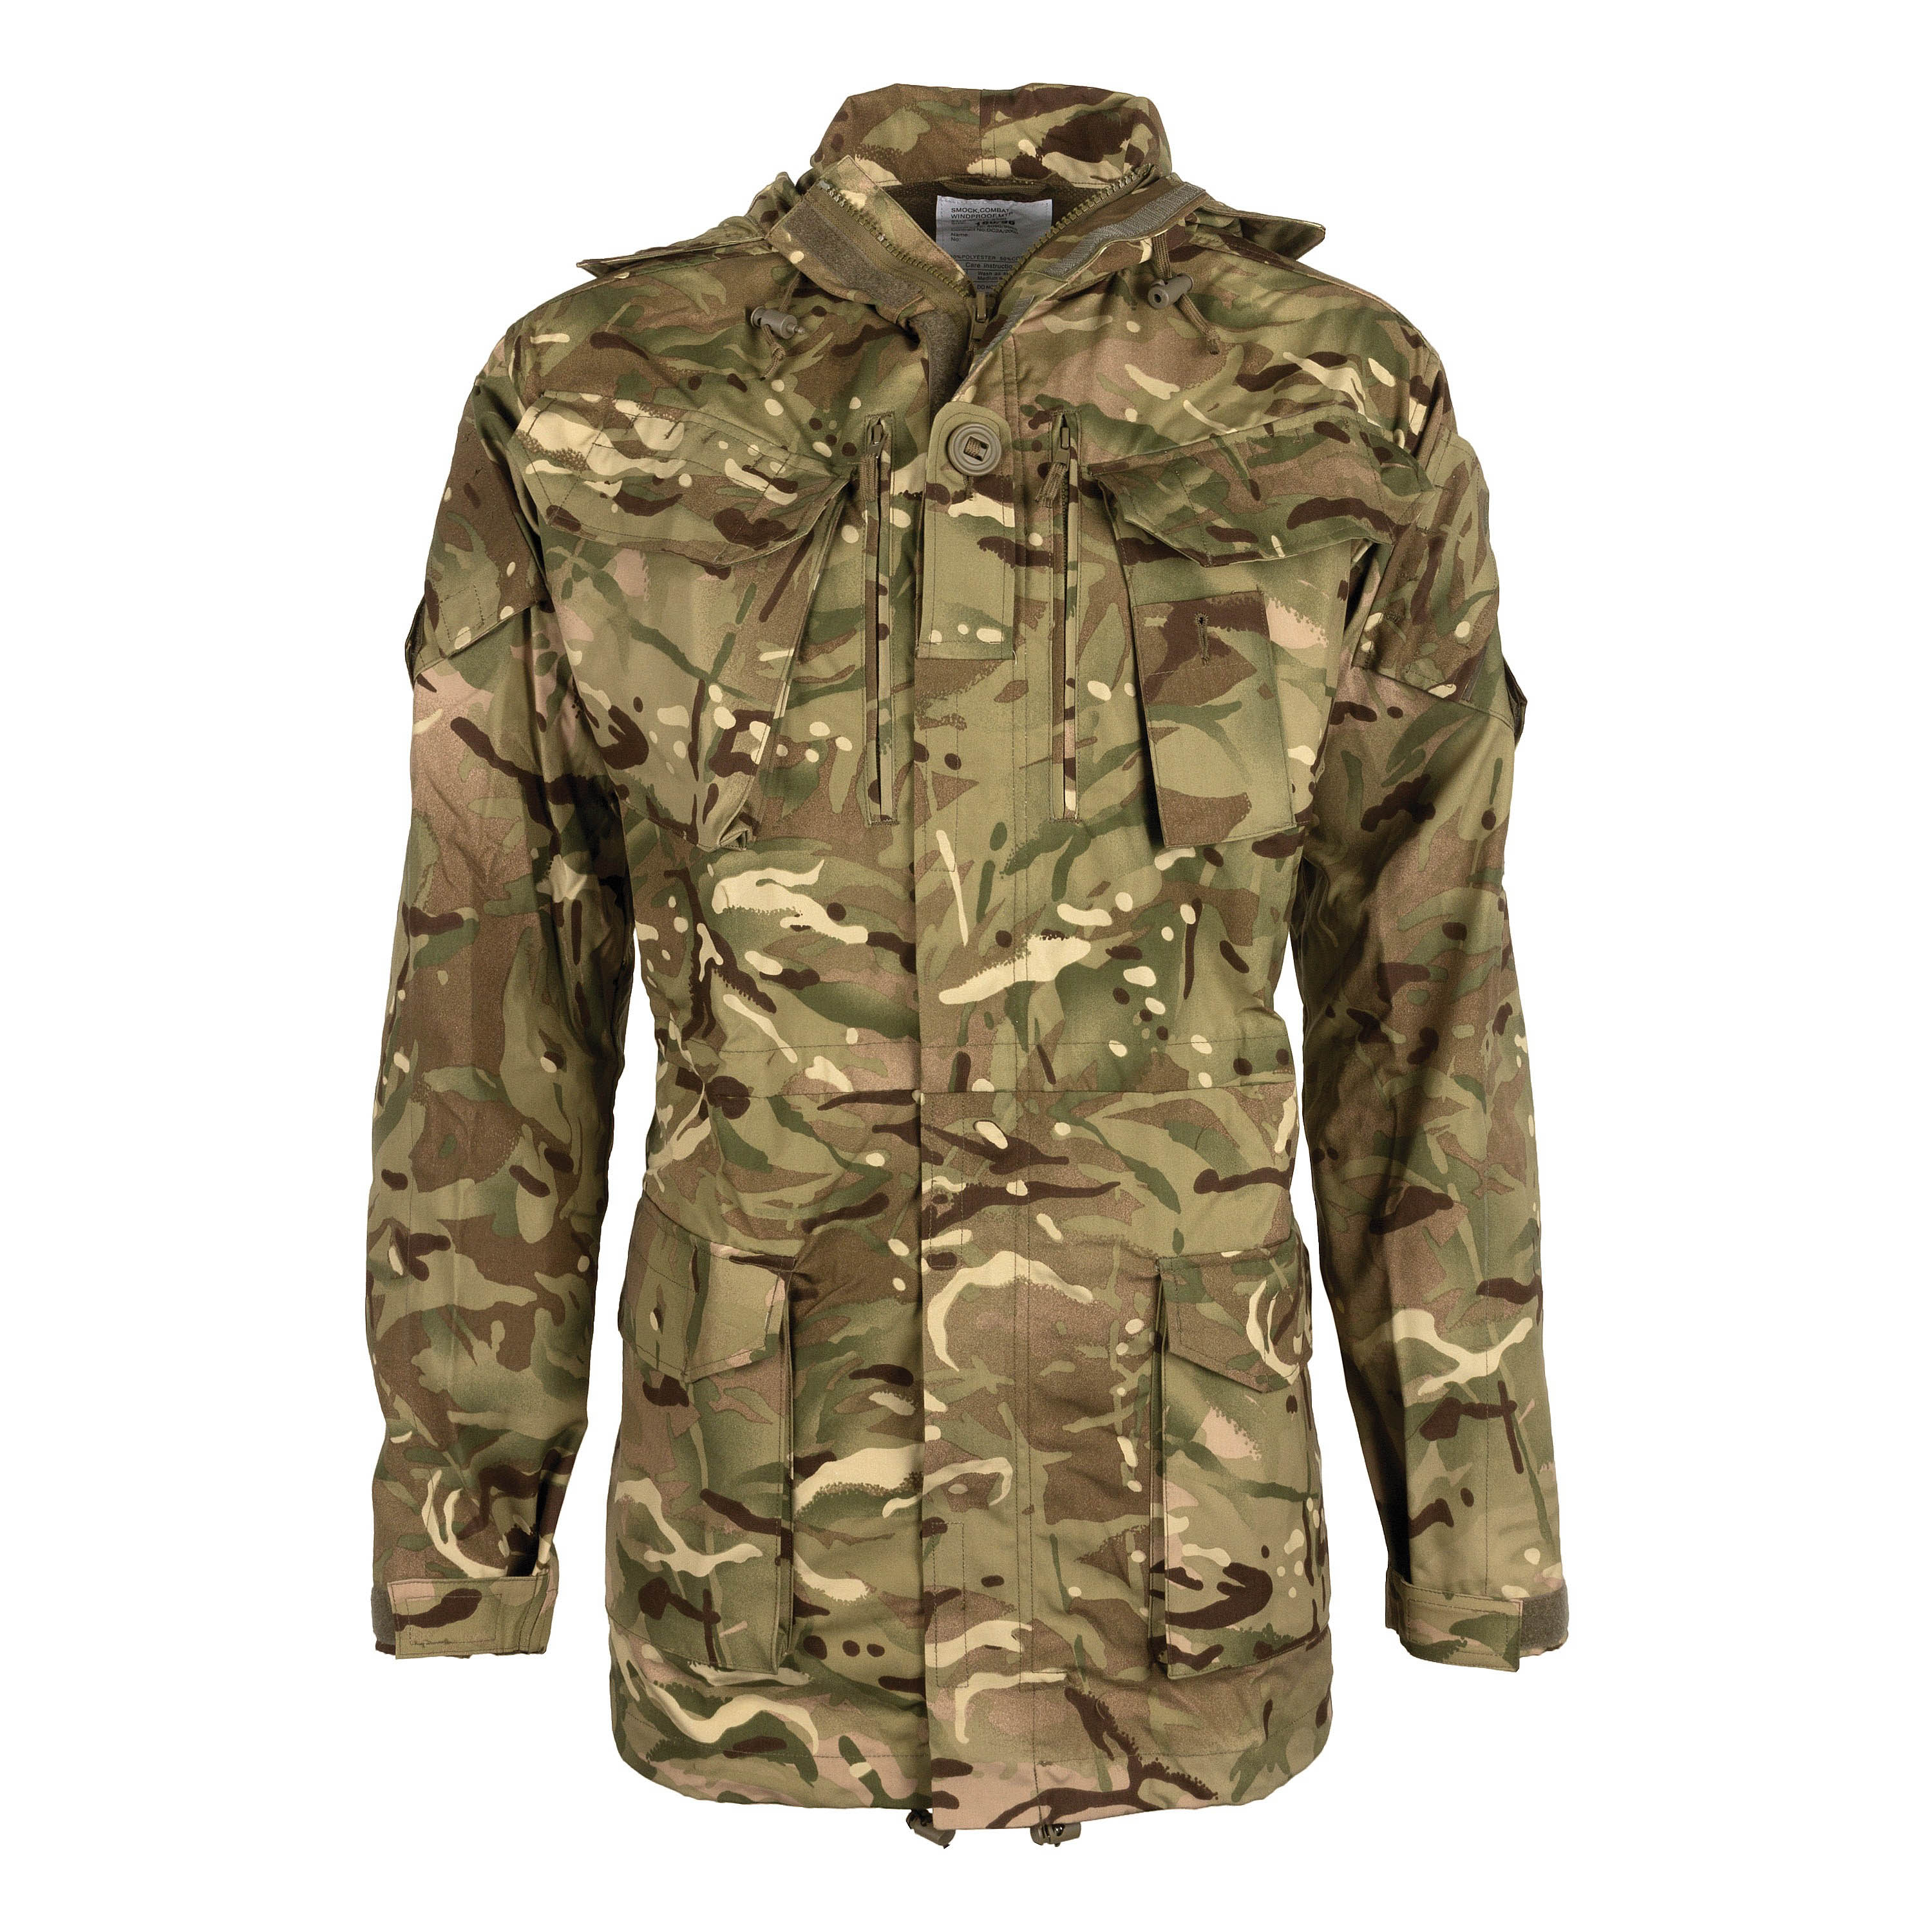 British Military Army MTP Camouflage Combat Windproof Smock Jacket 190/112 